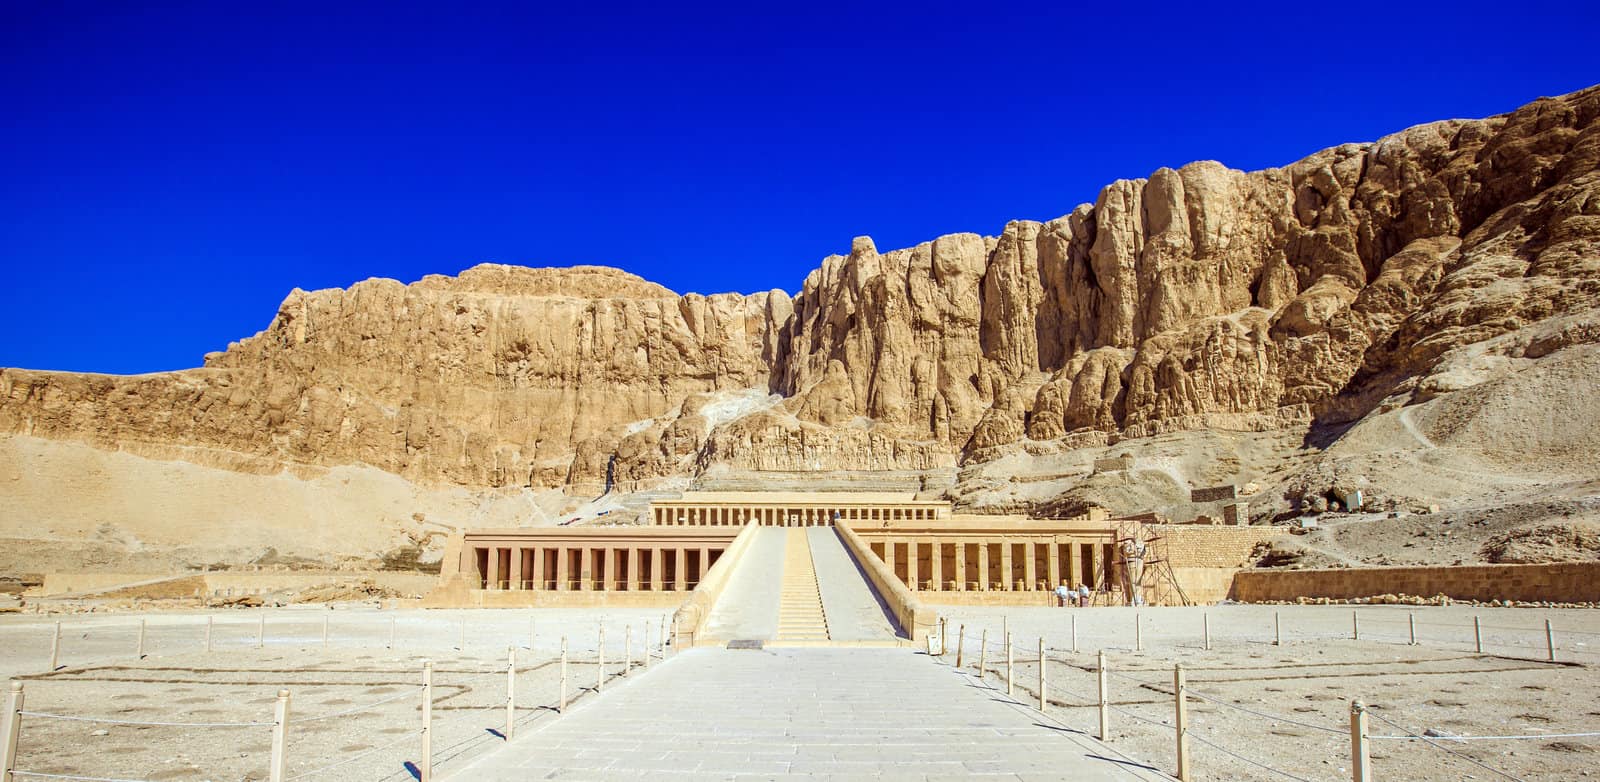 Temple of Hatshepsut, the first woman pharaoh.